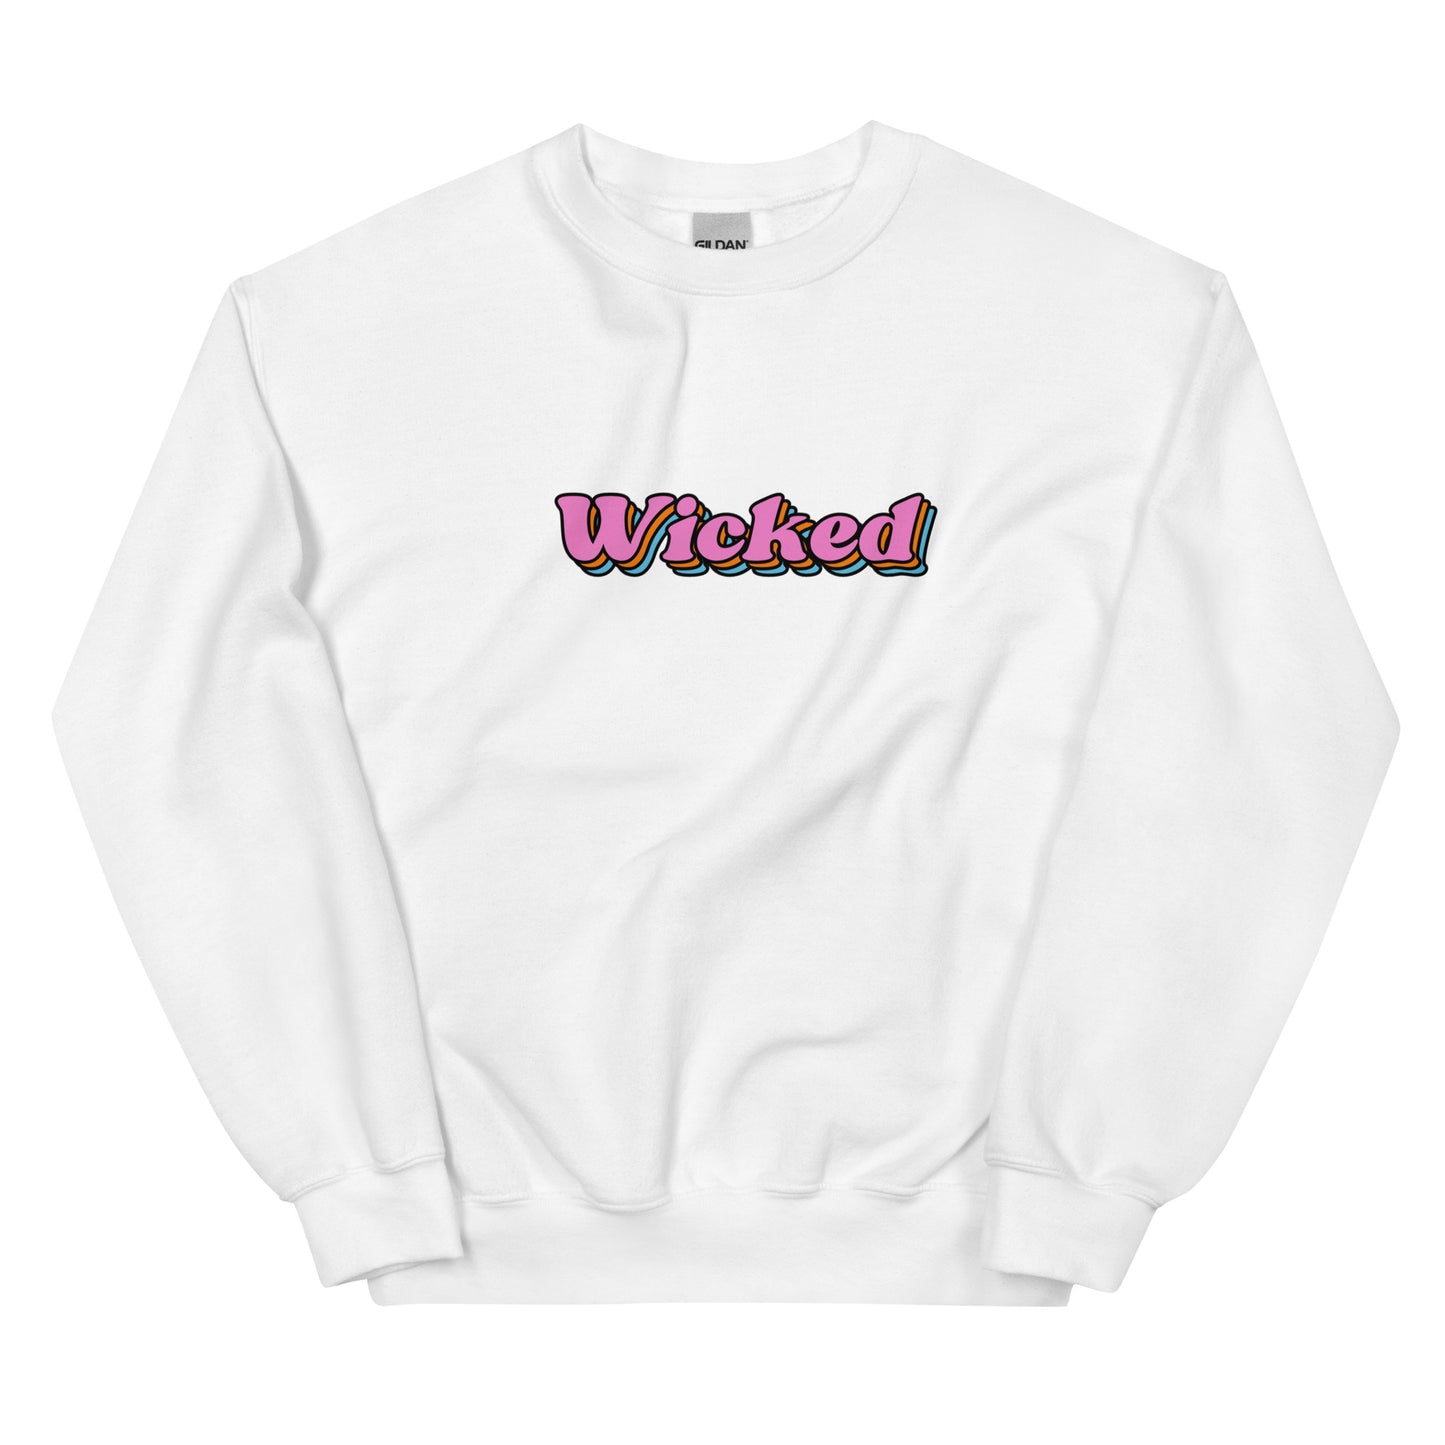 white crewneck that says "wicked" in pink lettering